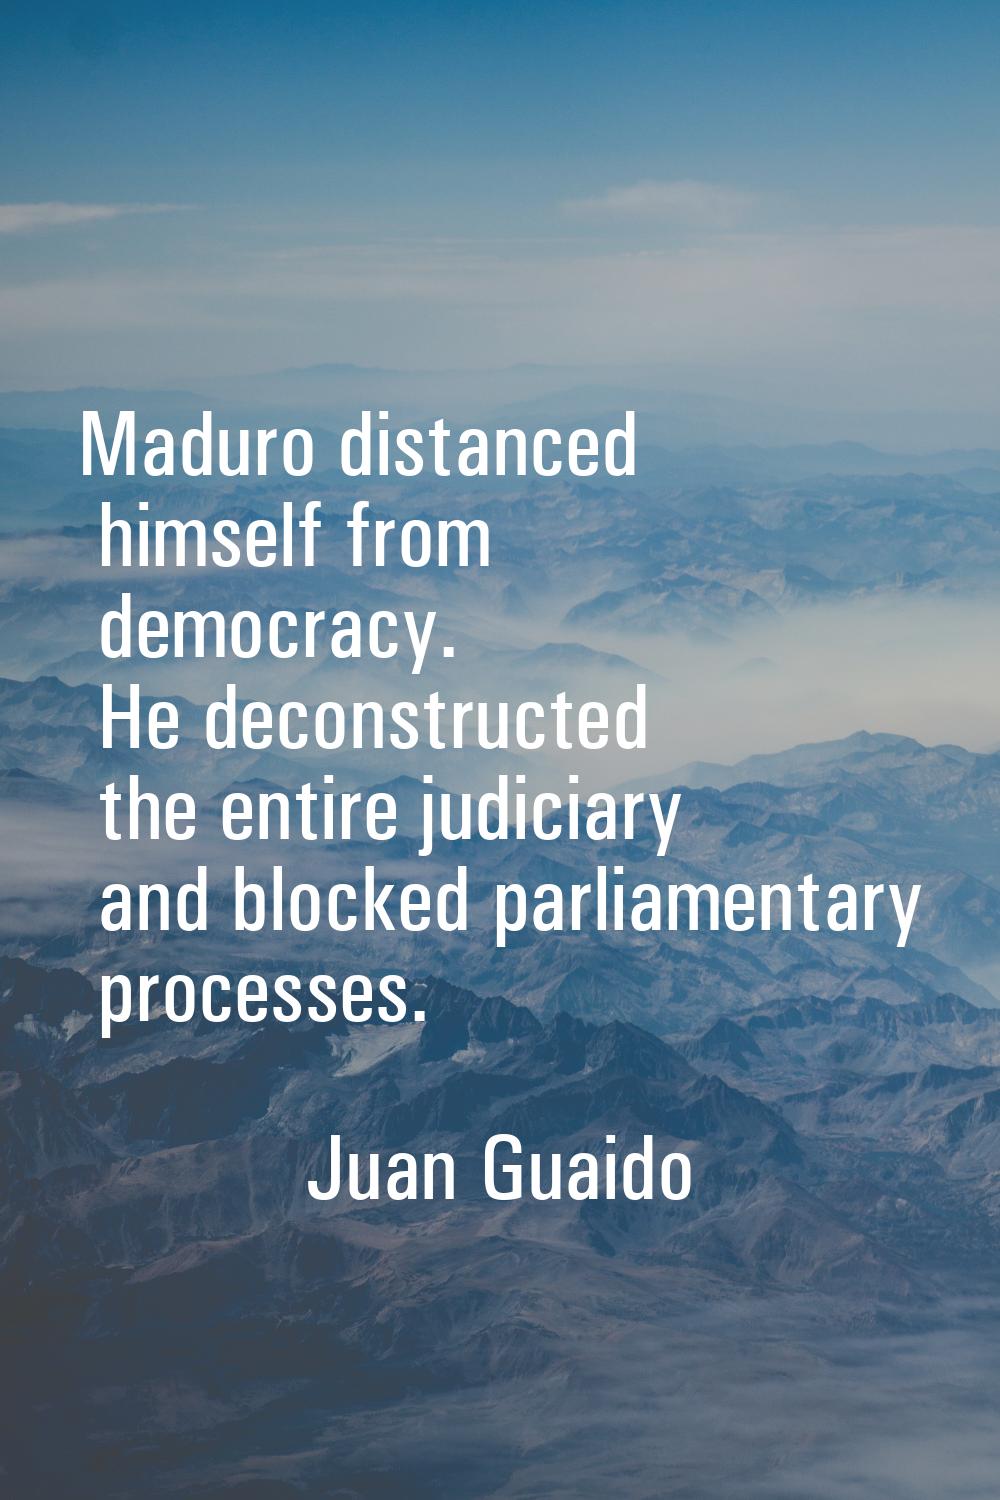 Maduro distanced himself from democracy. He deconstructed the entire judiciary and blocked parliame